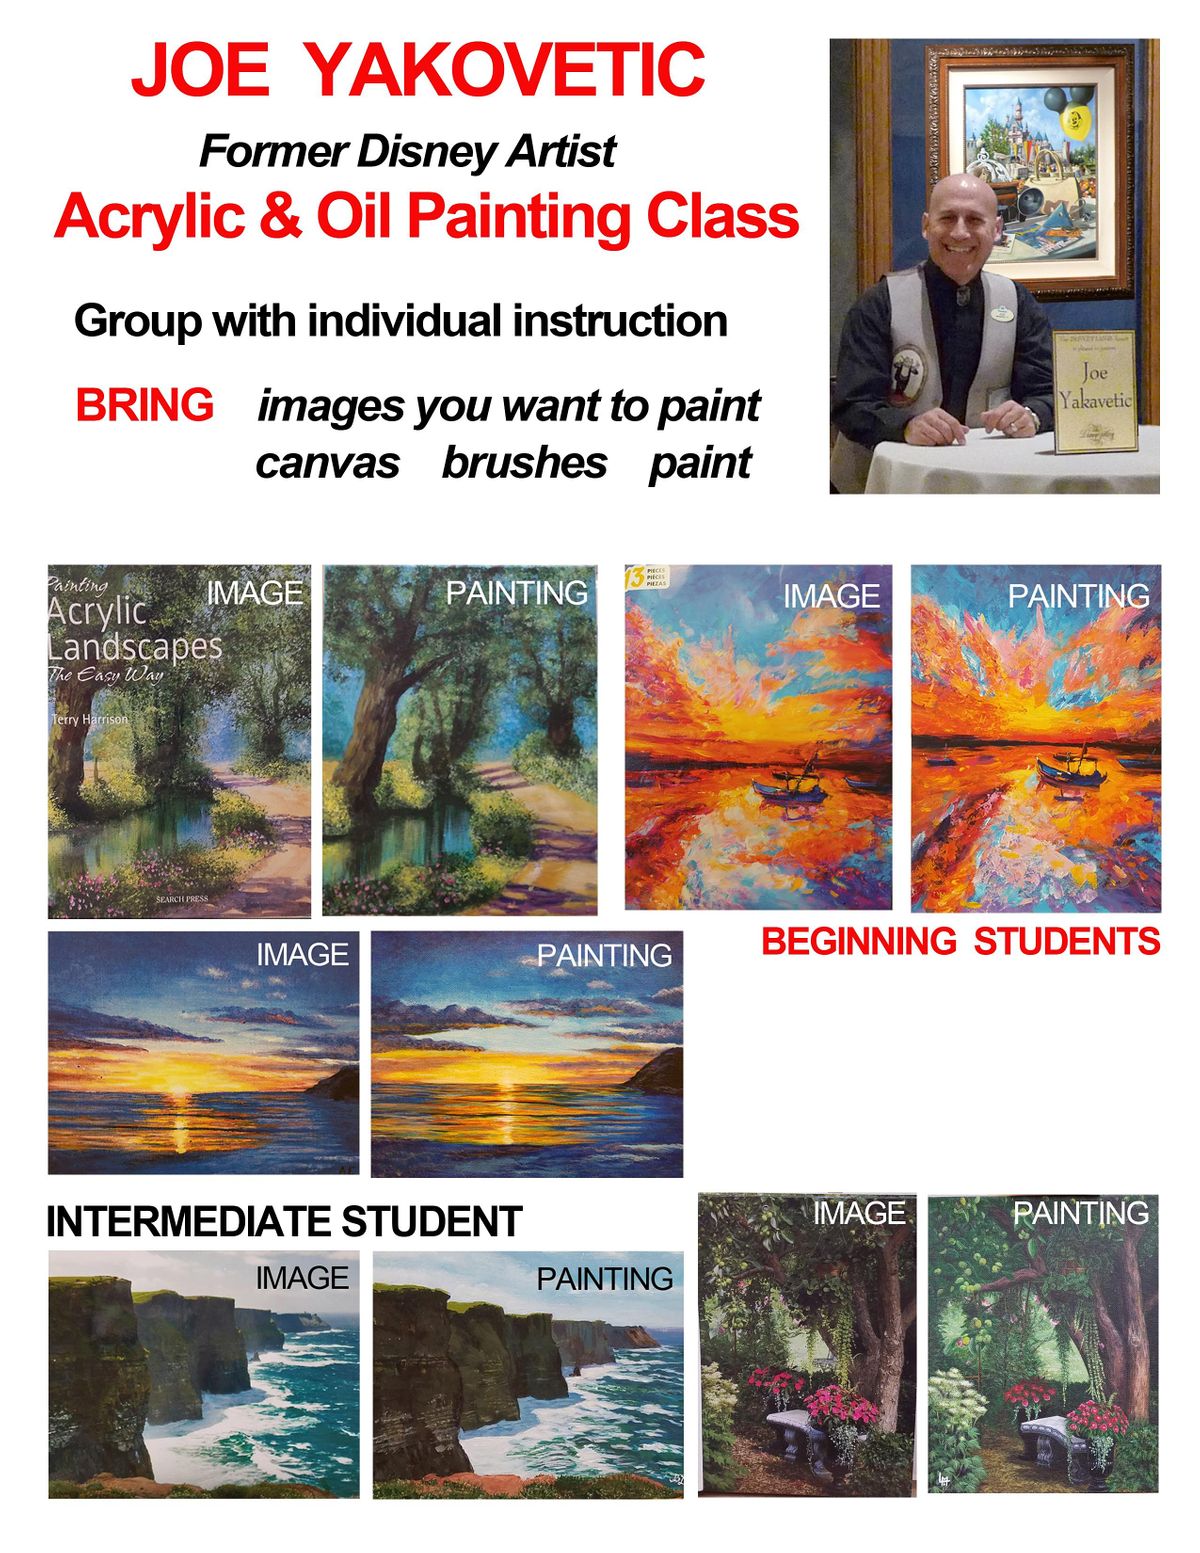 Acrylic Painting For All Levels with Joe Yakovetic